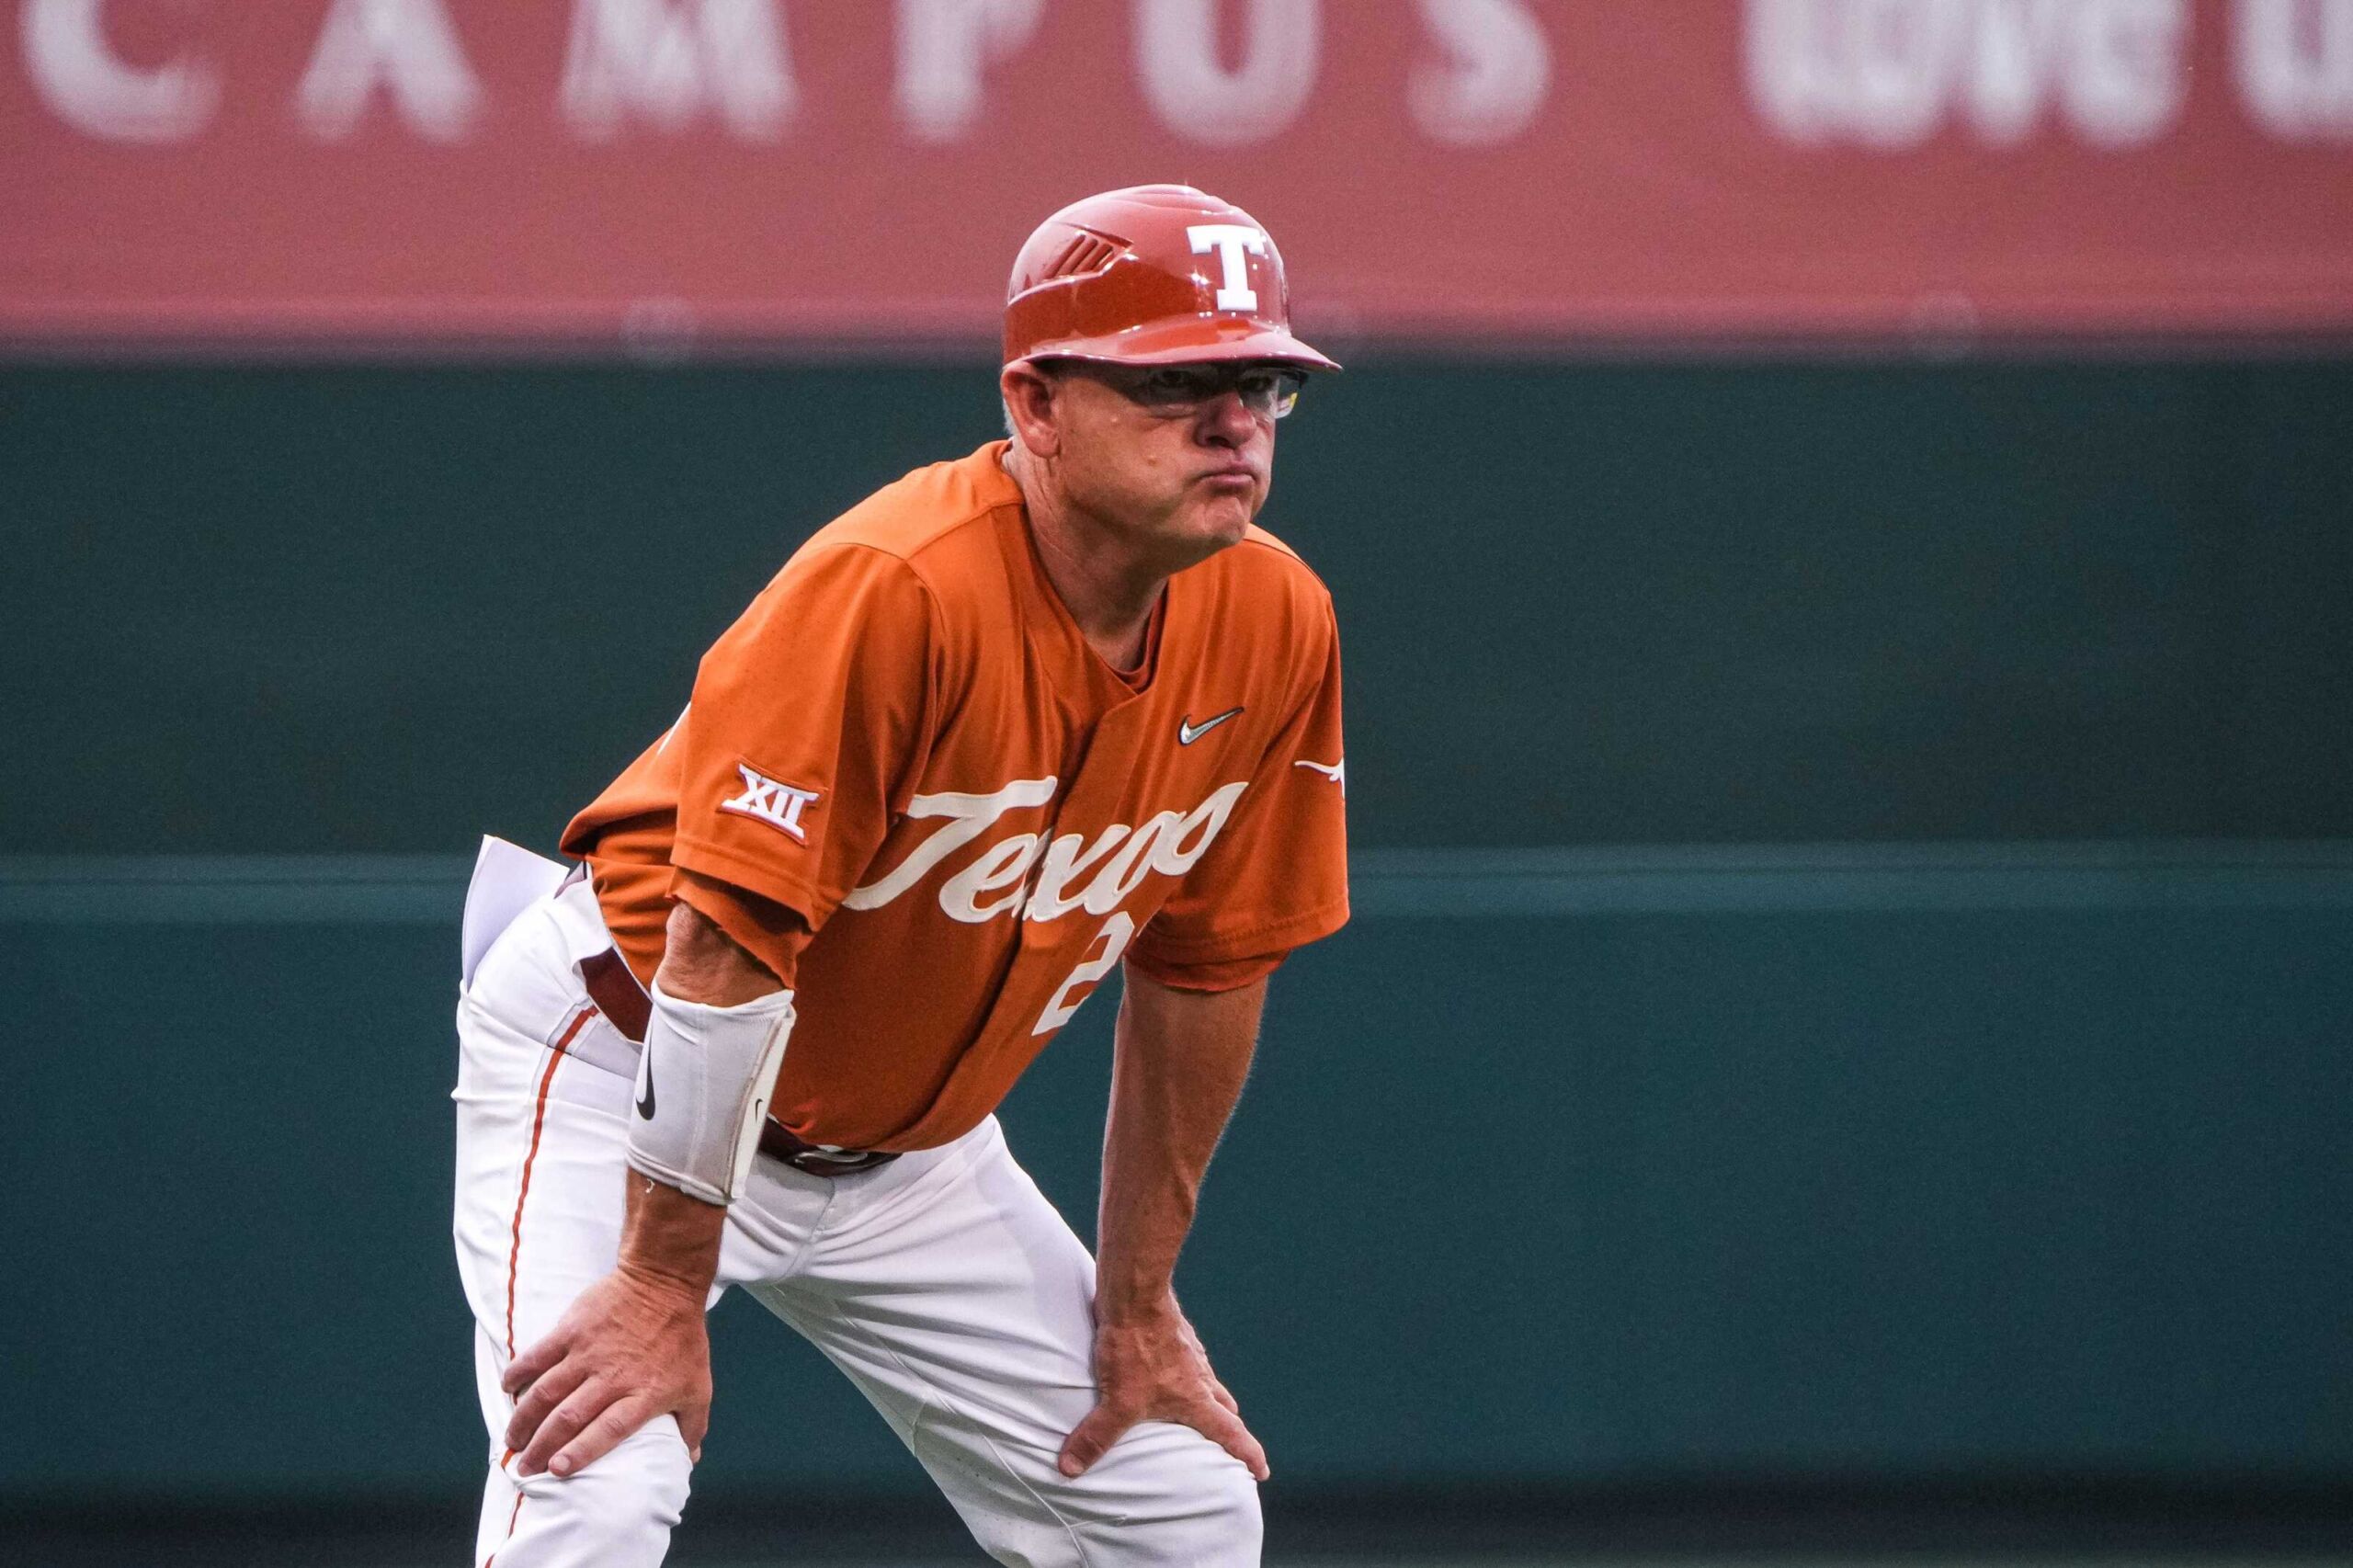 Texas Baseball: Are the Longhorns in play to host a regional?